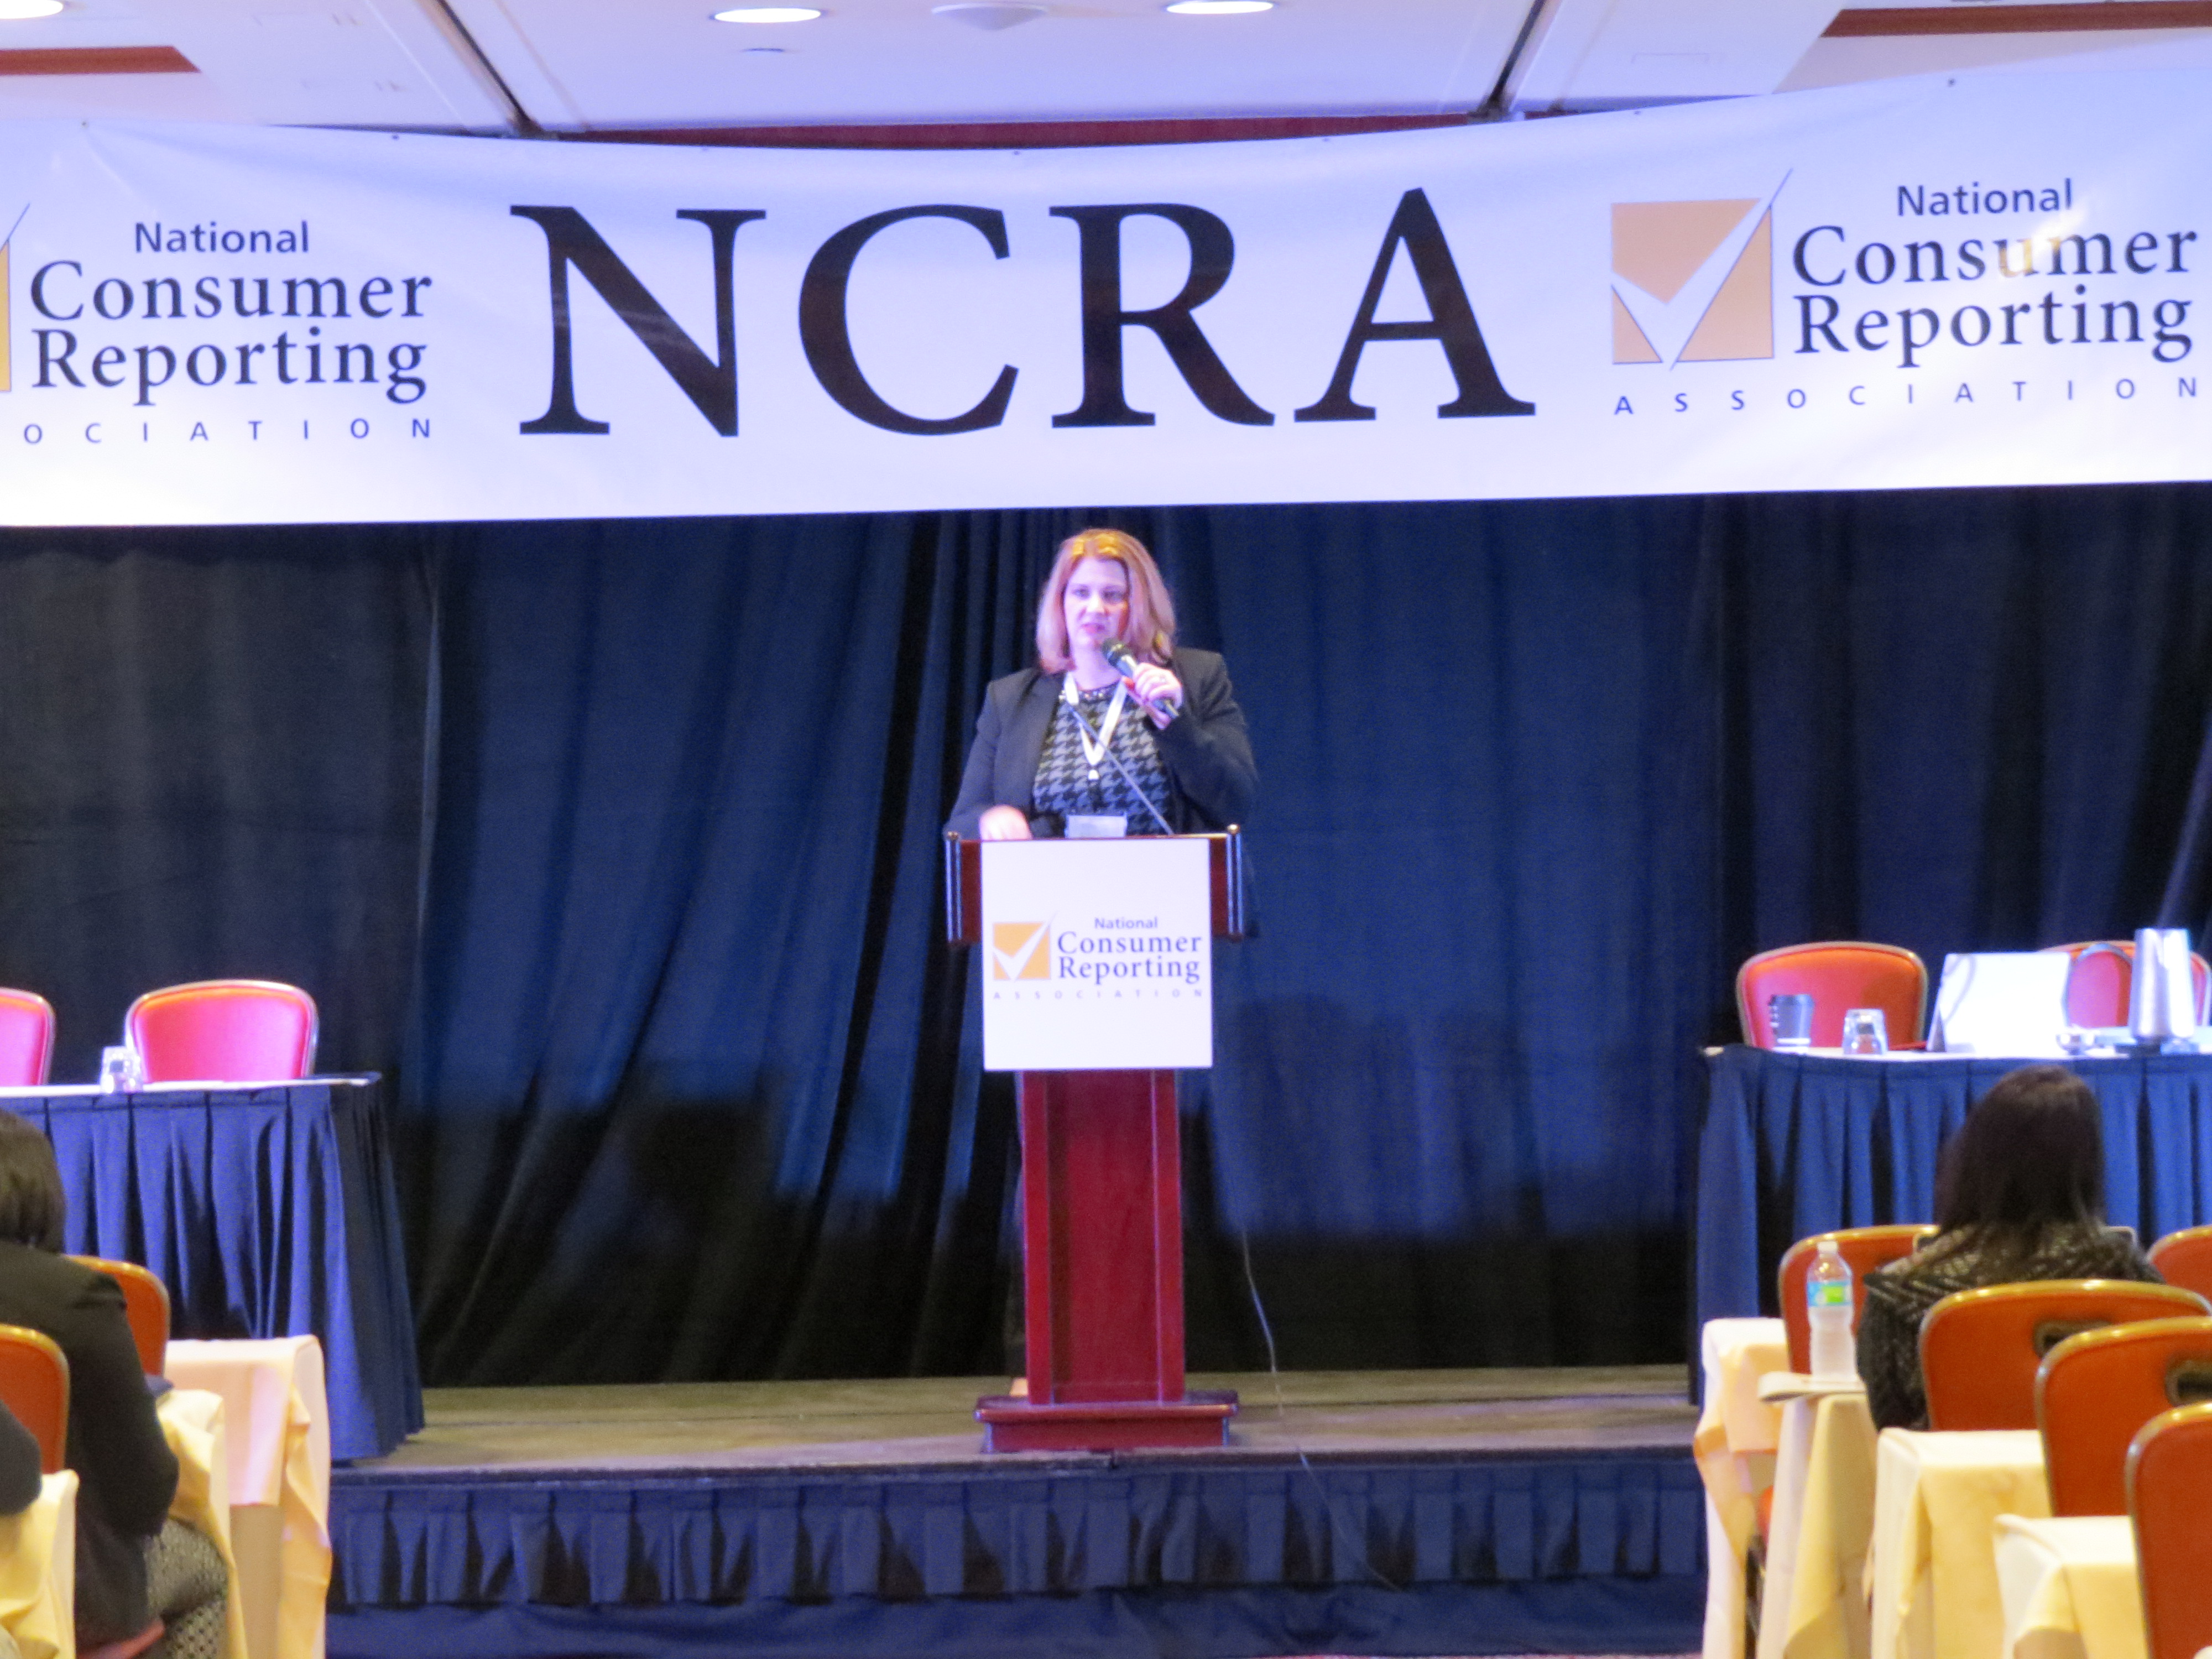 NCRA Legal Counsel Christi Lawson provides a legal update to Conference attendees